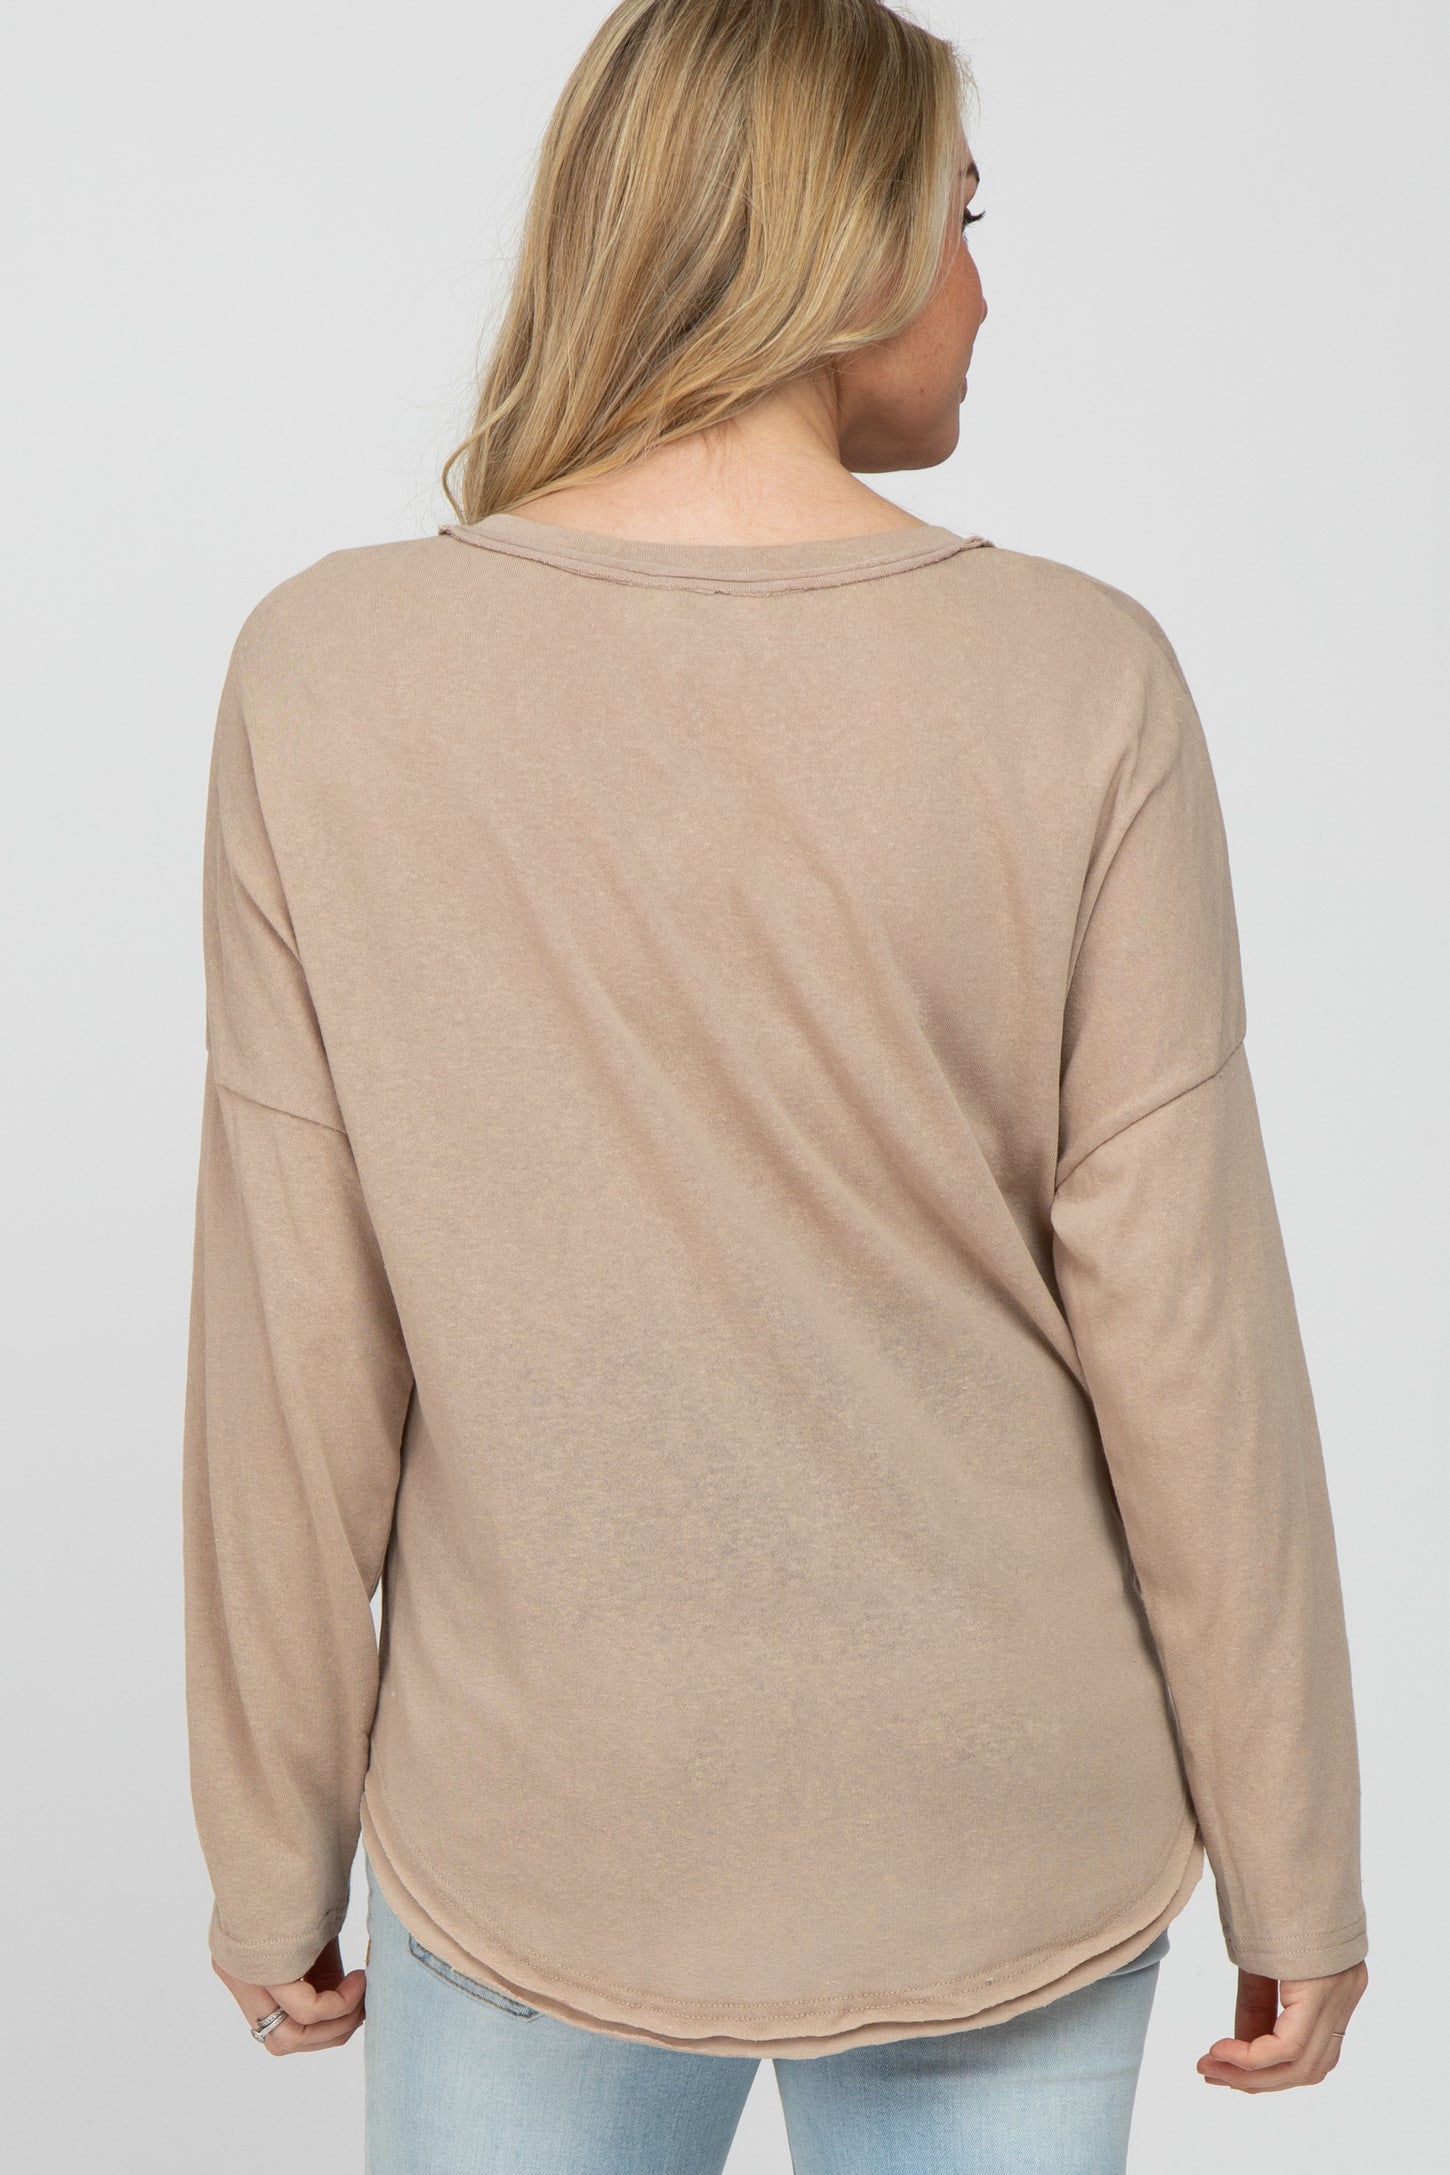 Taupe Button Front Raw Edge Maternity Top